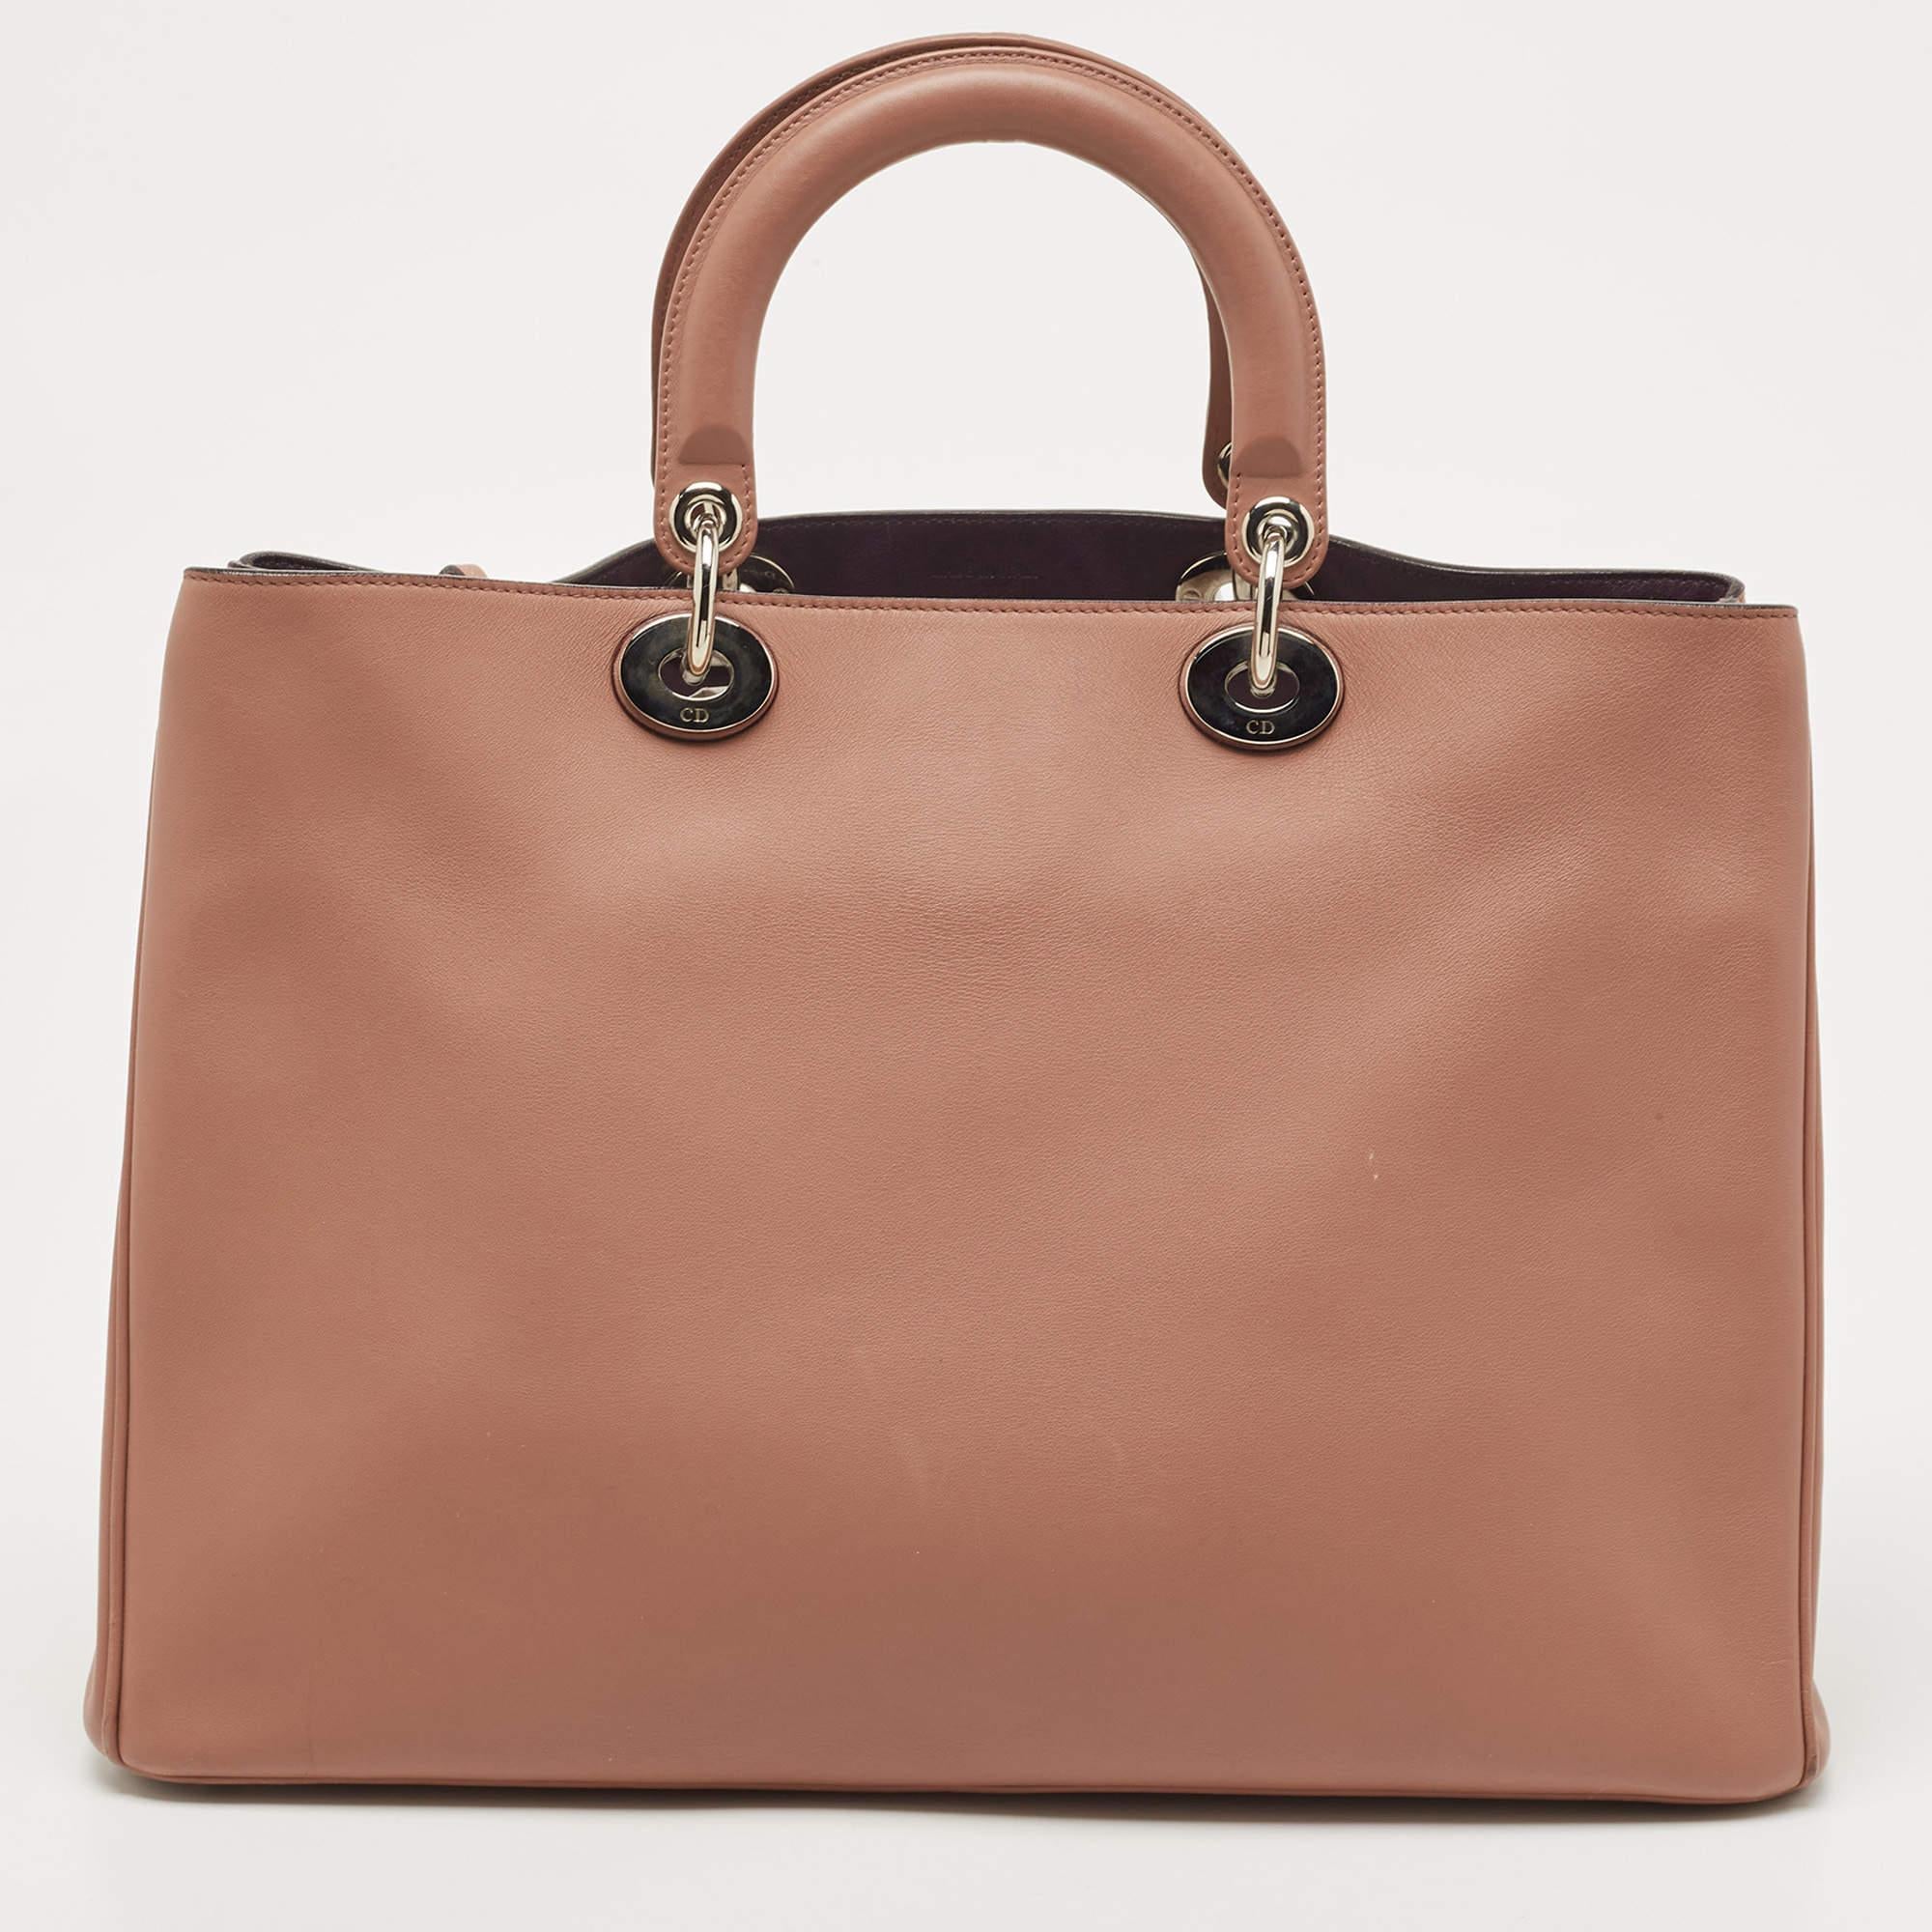 This Diorissimo Shopper tote from the House of Dior will help you keep your belongings safely and stylishly. It is made using leather on the exterior and is highlighted with D.I.O.R charms on the front. It features dual handles, a shoulder strap,